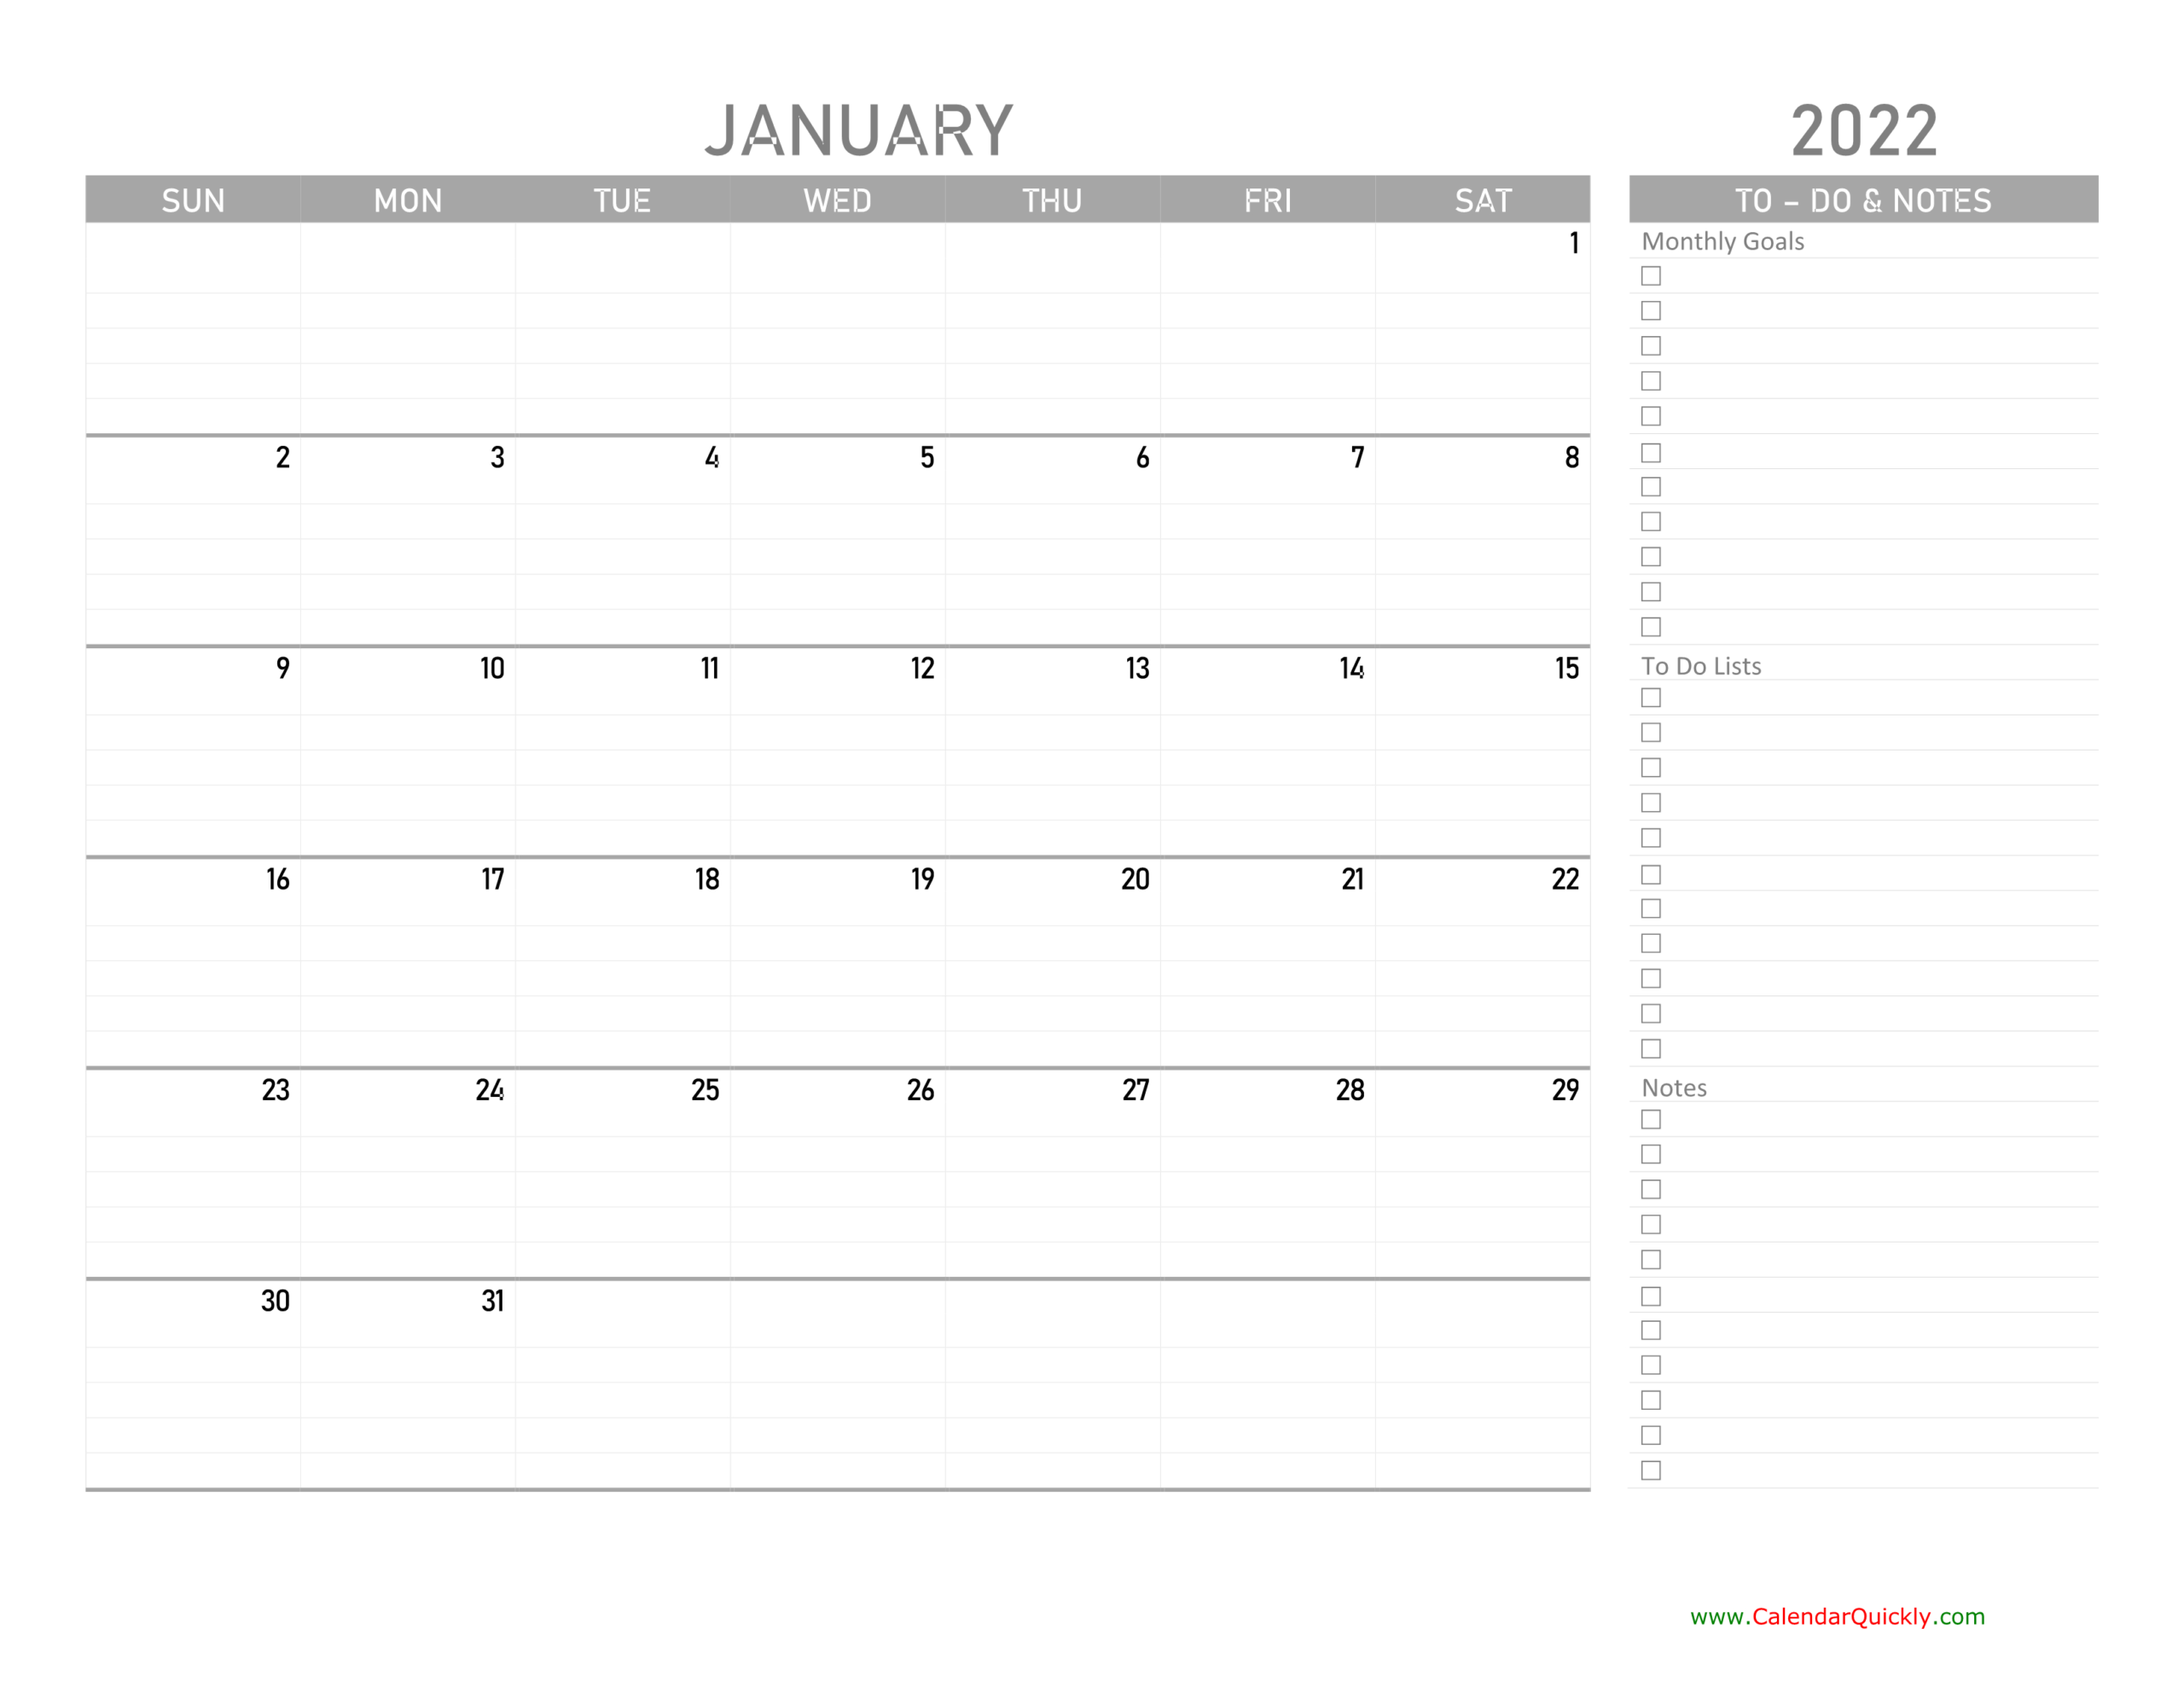 Monthly 2022 Calendar With To-Do List | Calendar Quickly